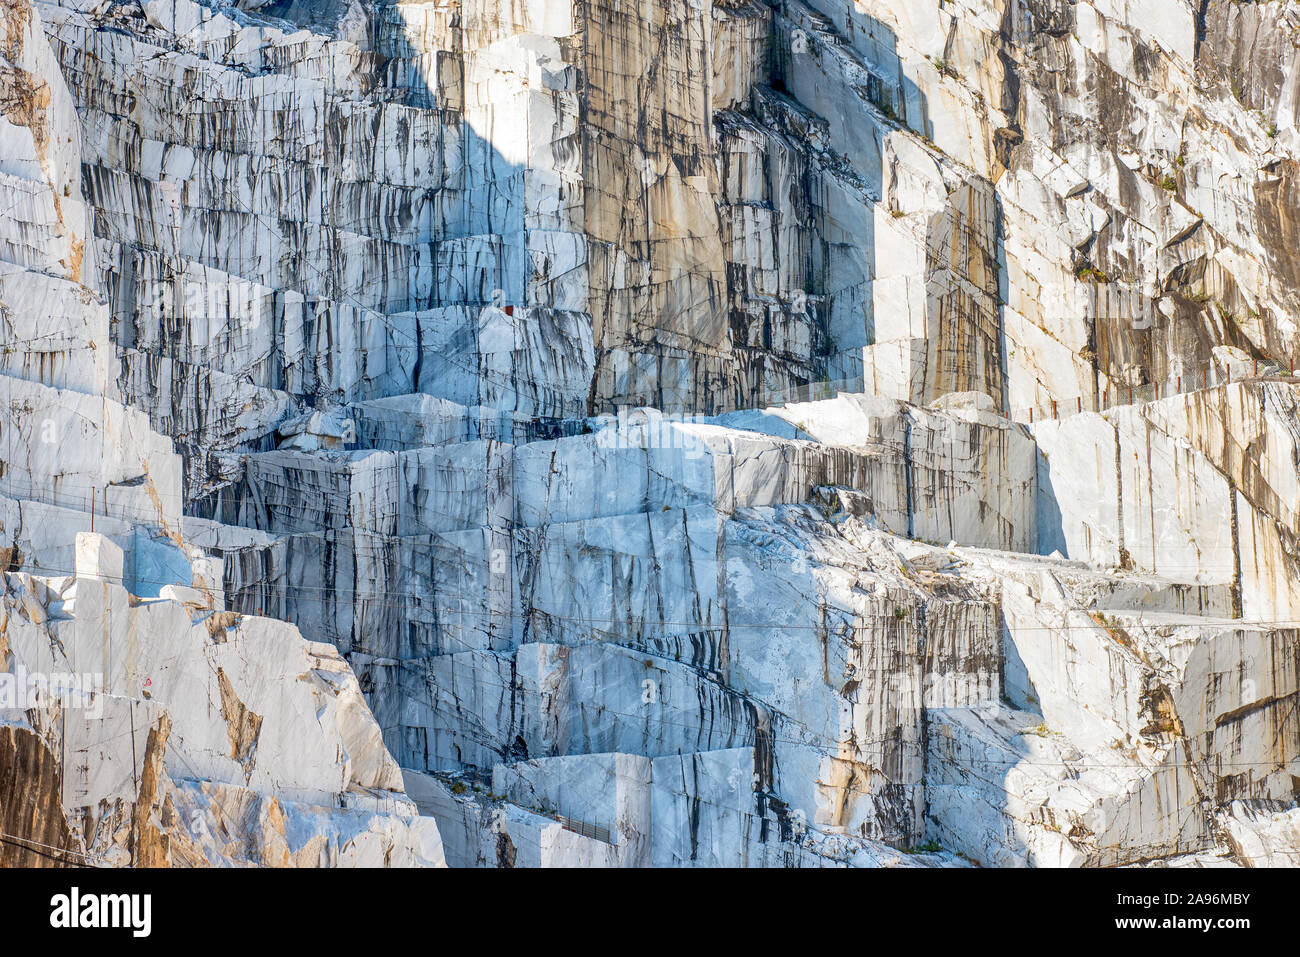 Detail of an Italian Marble quarry or open cast mine pit showing the rock face where the stone is excavated in blocks for construction and sculpture i Stock Photo